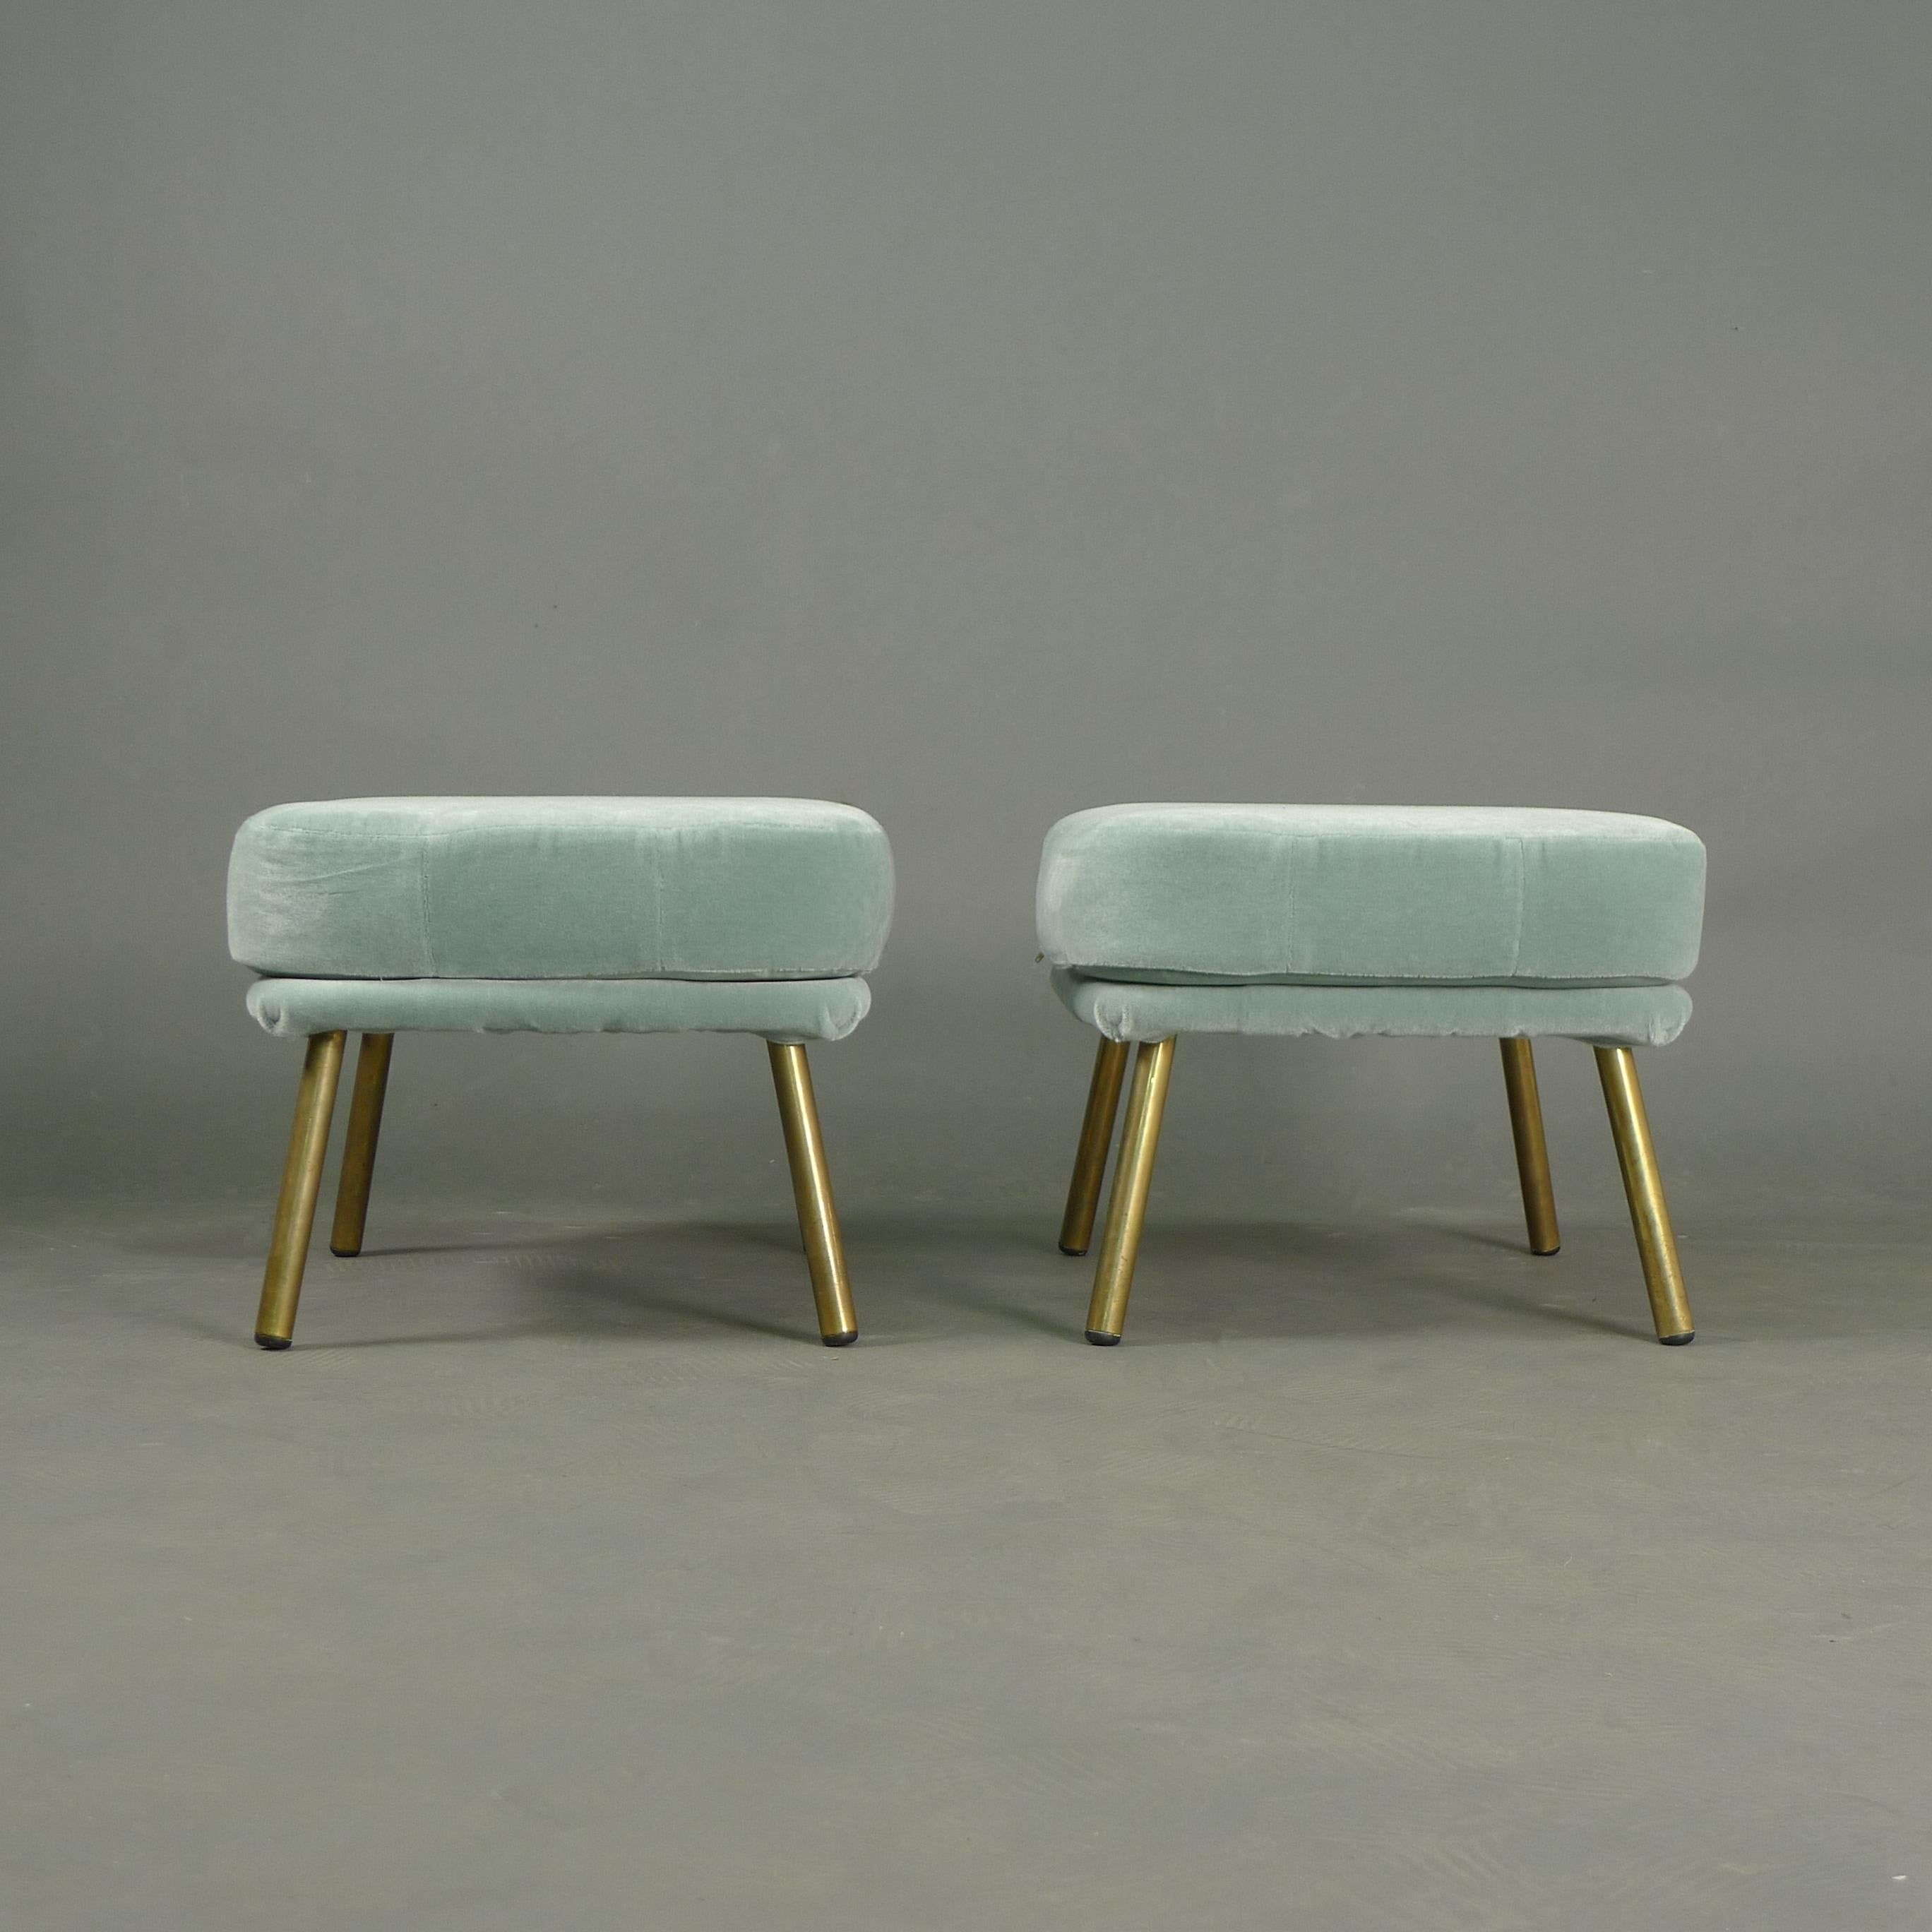 Marco Zanuso, Pair of Senior Chairs, 1950s and matching pair of ottomans For Sale 13